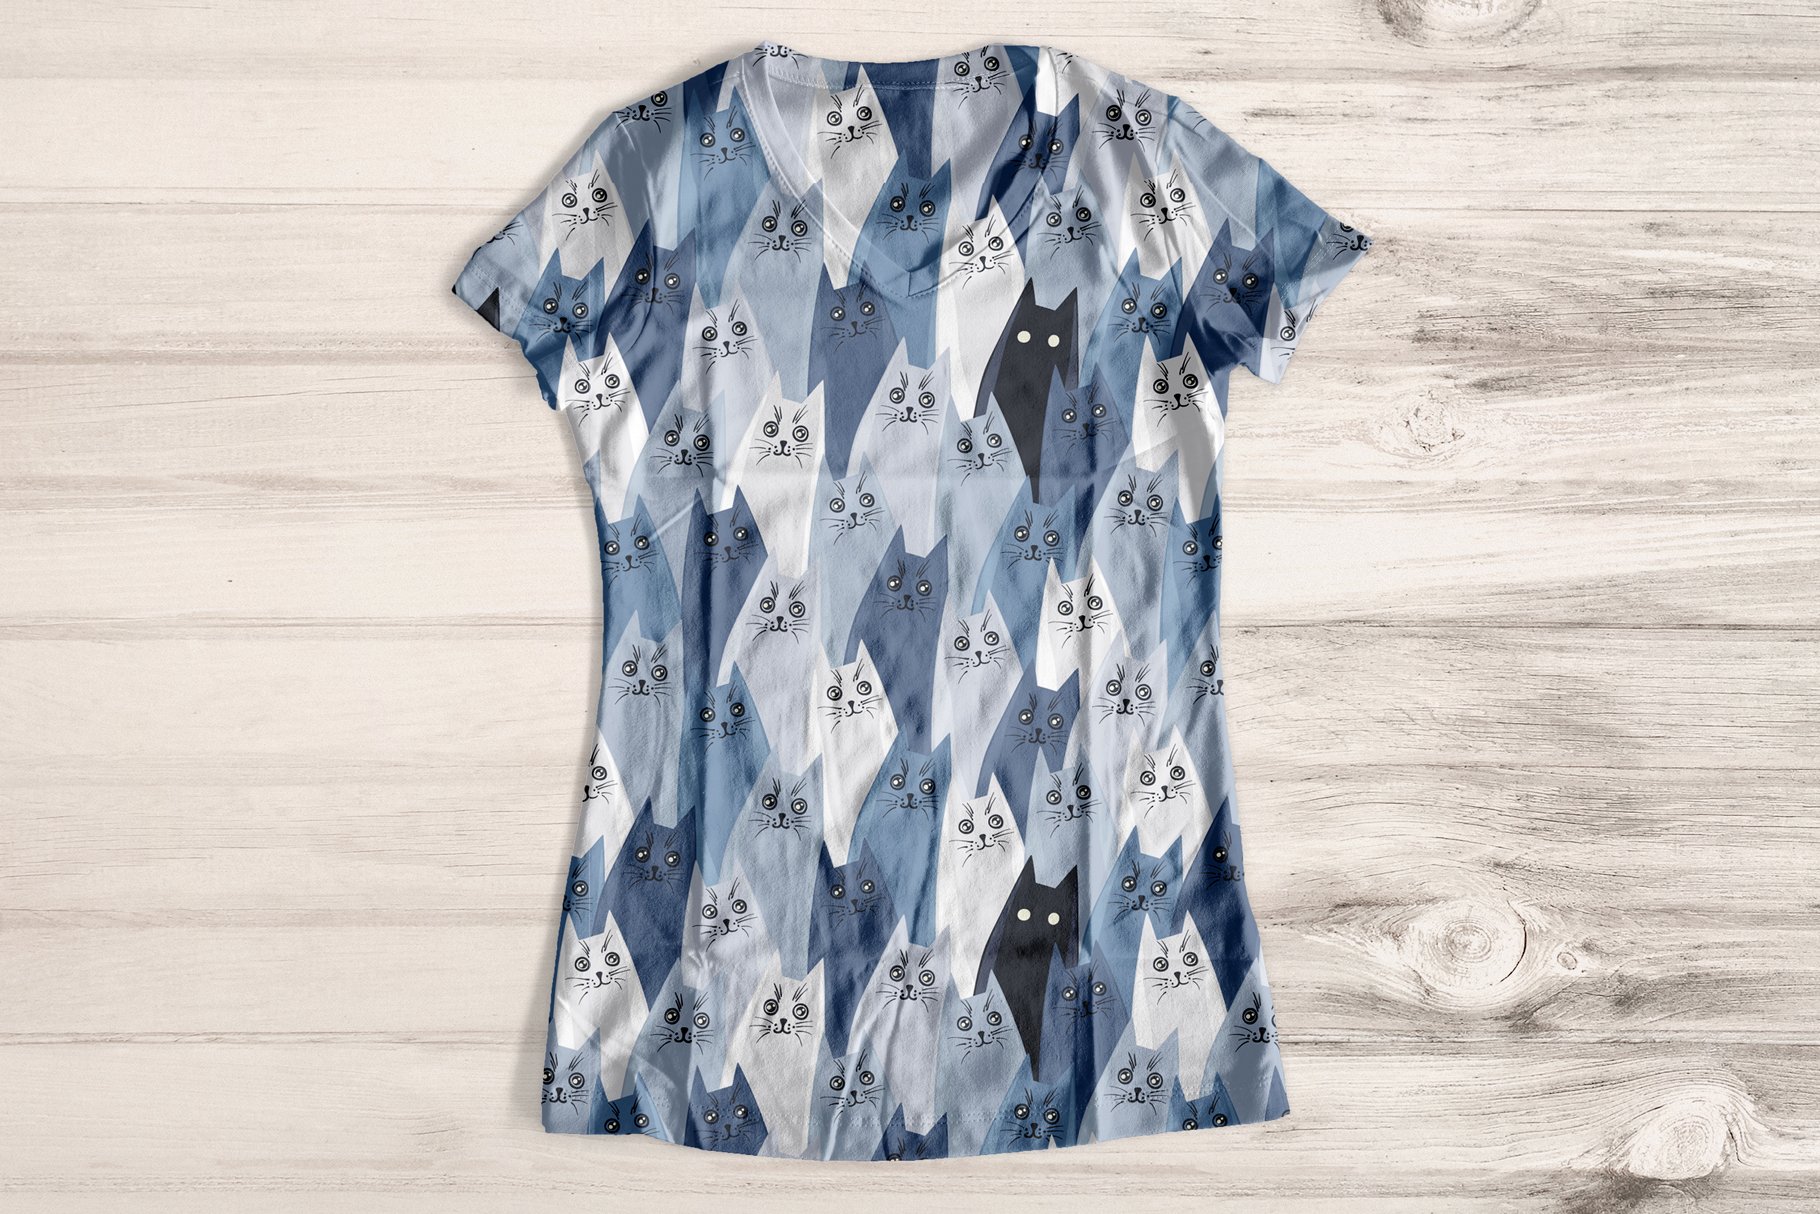 Blue t-shirt with many cats.